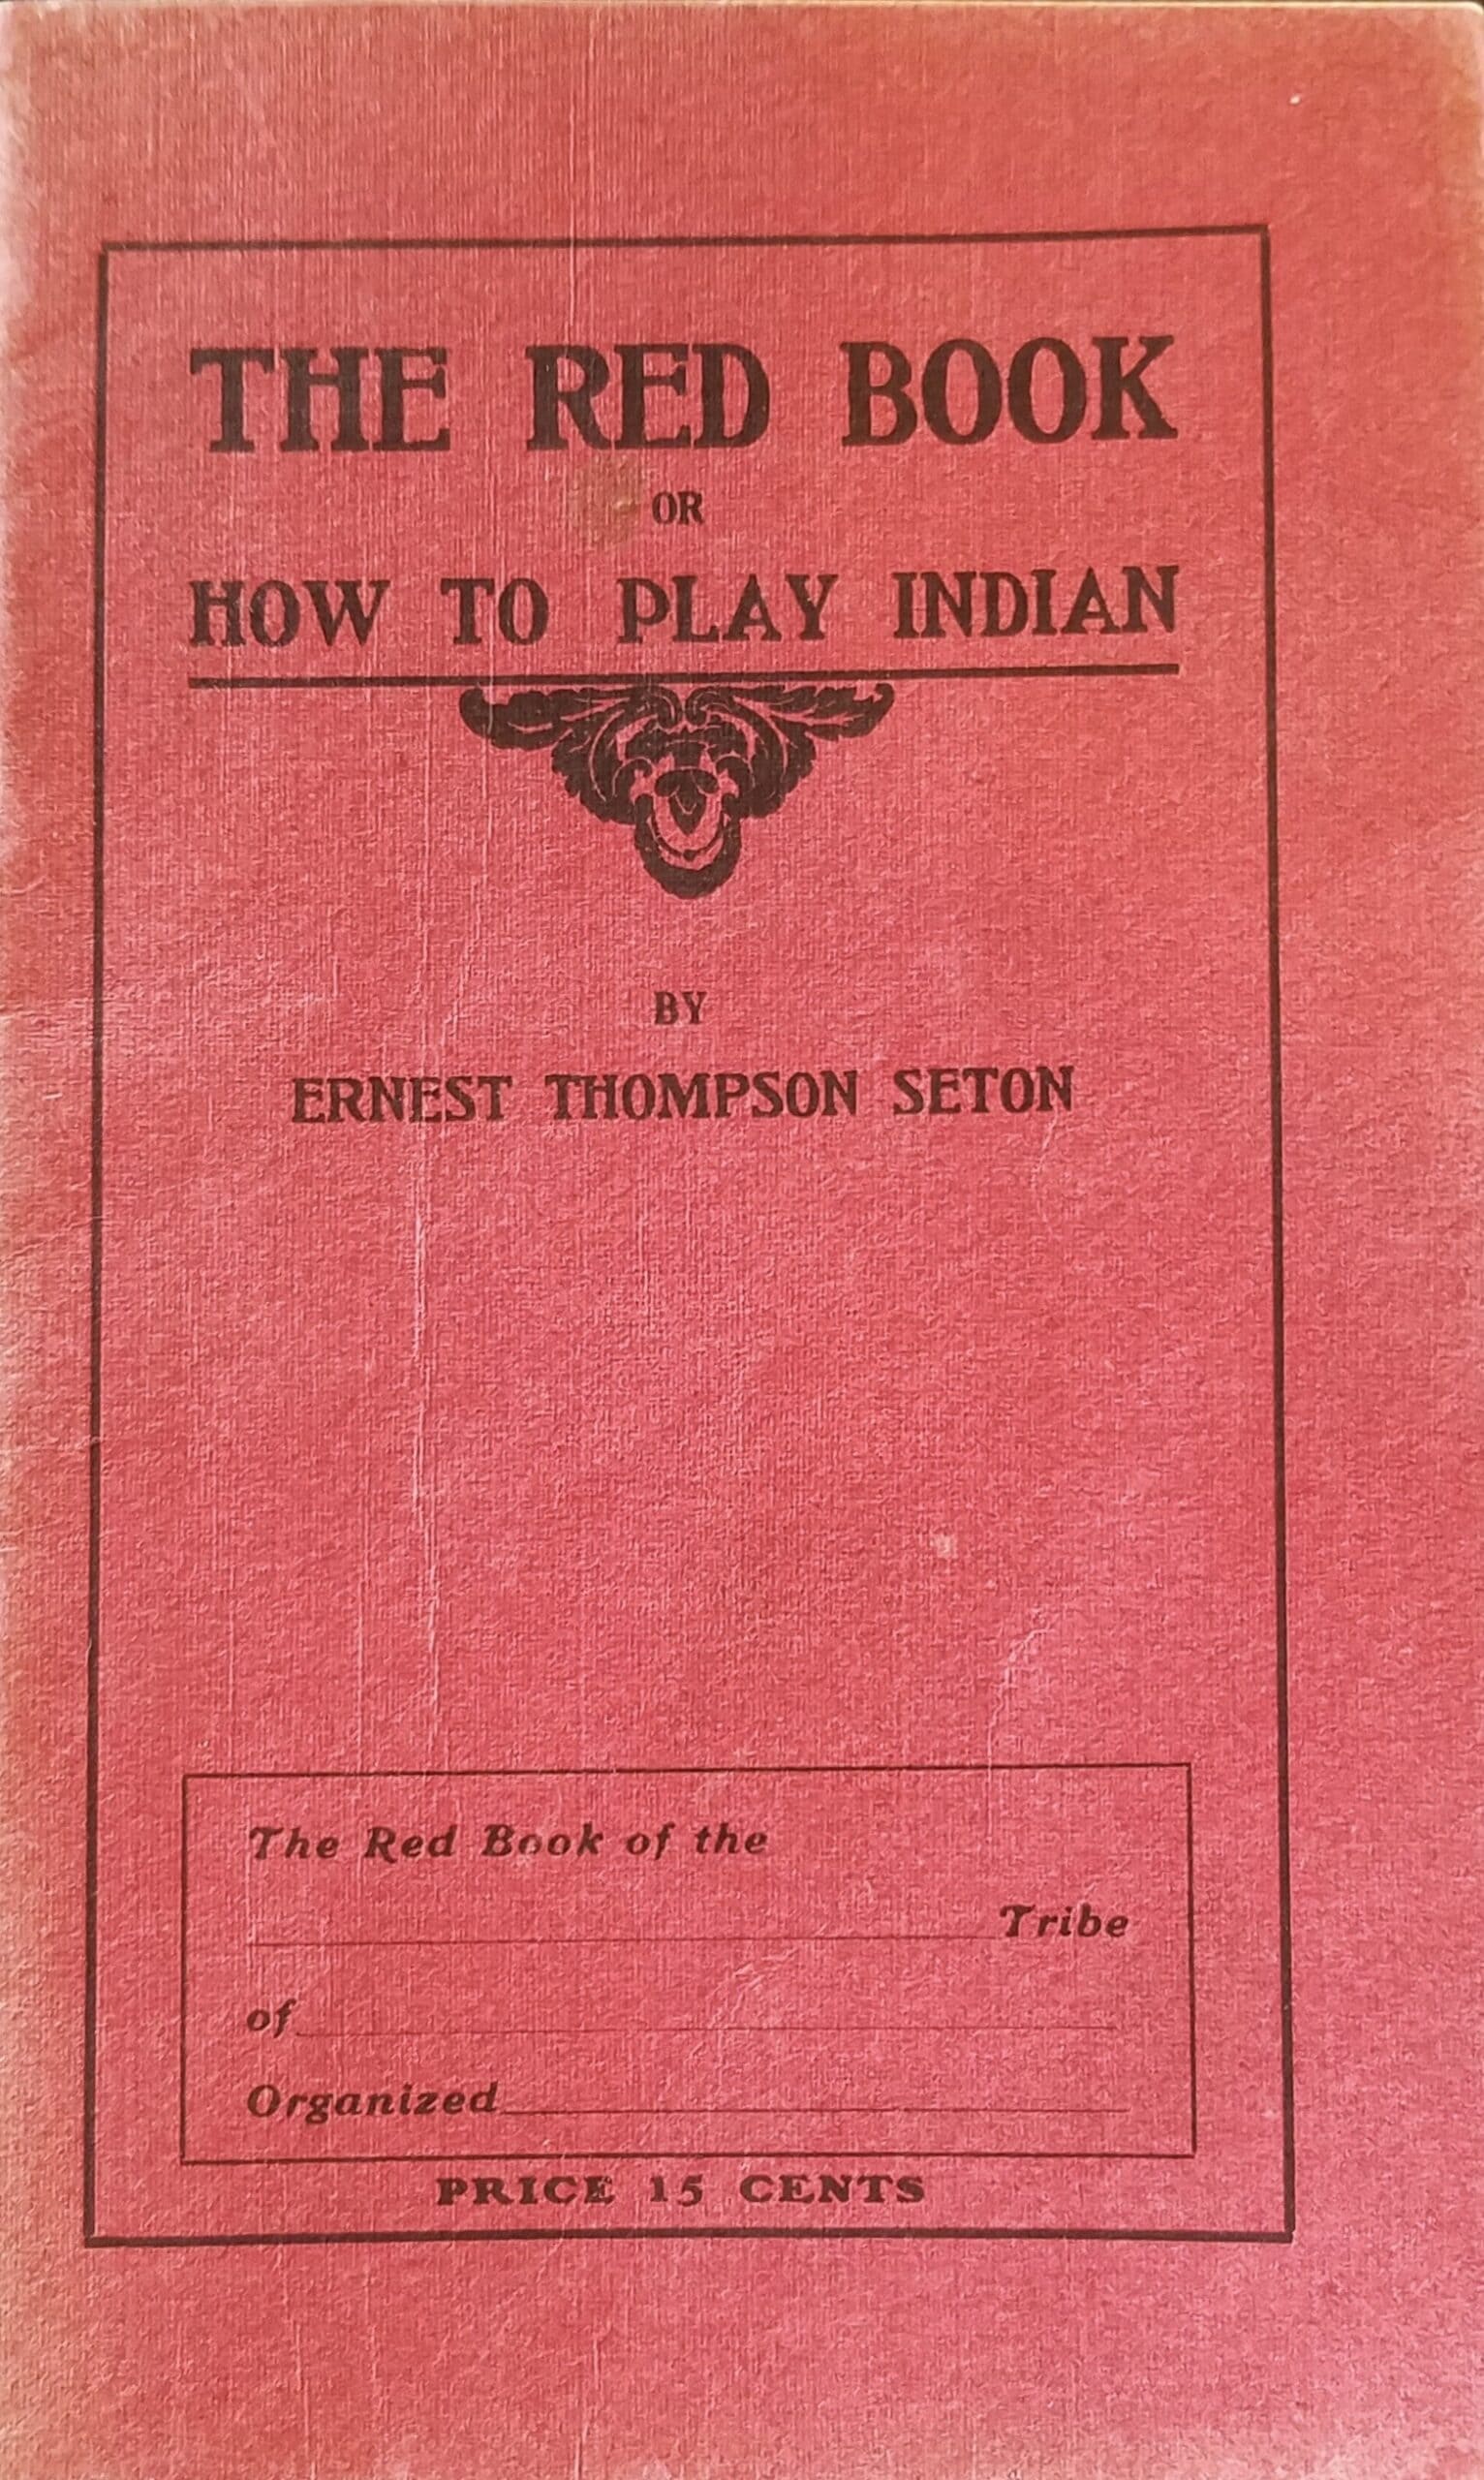 How to Play Indian According to Seton